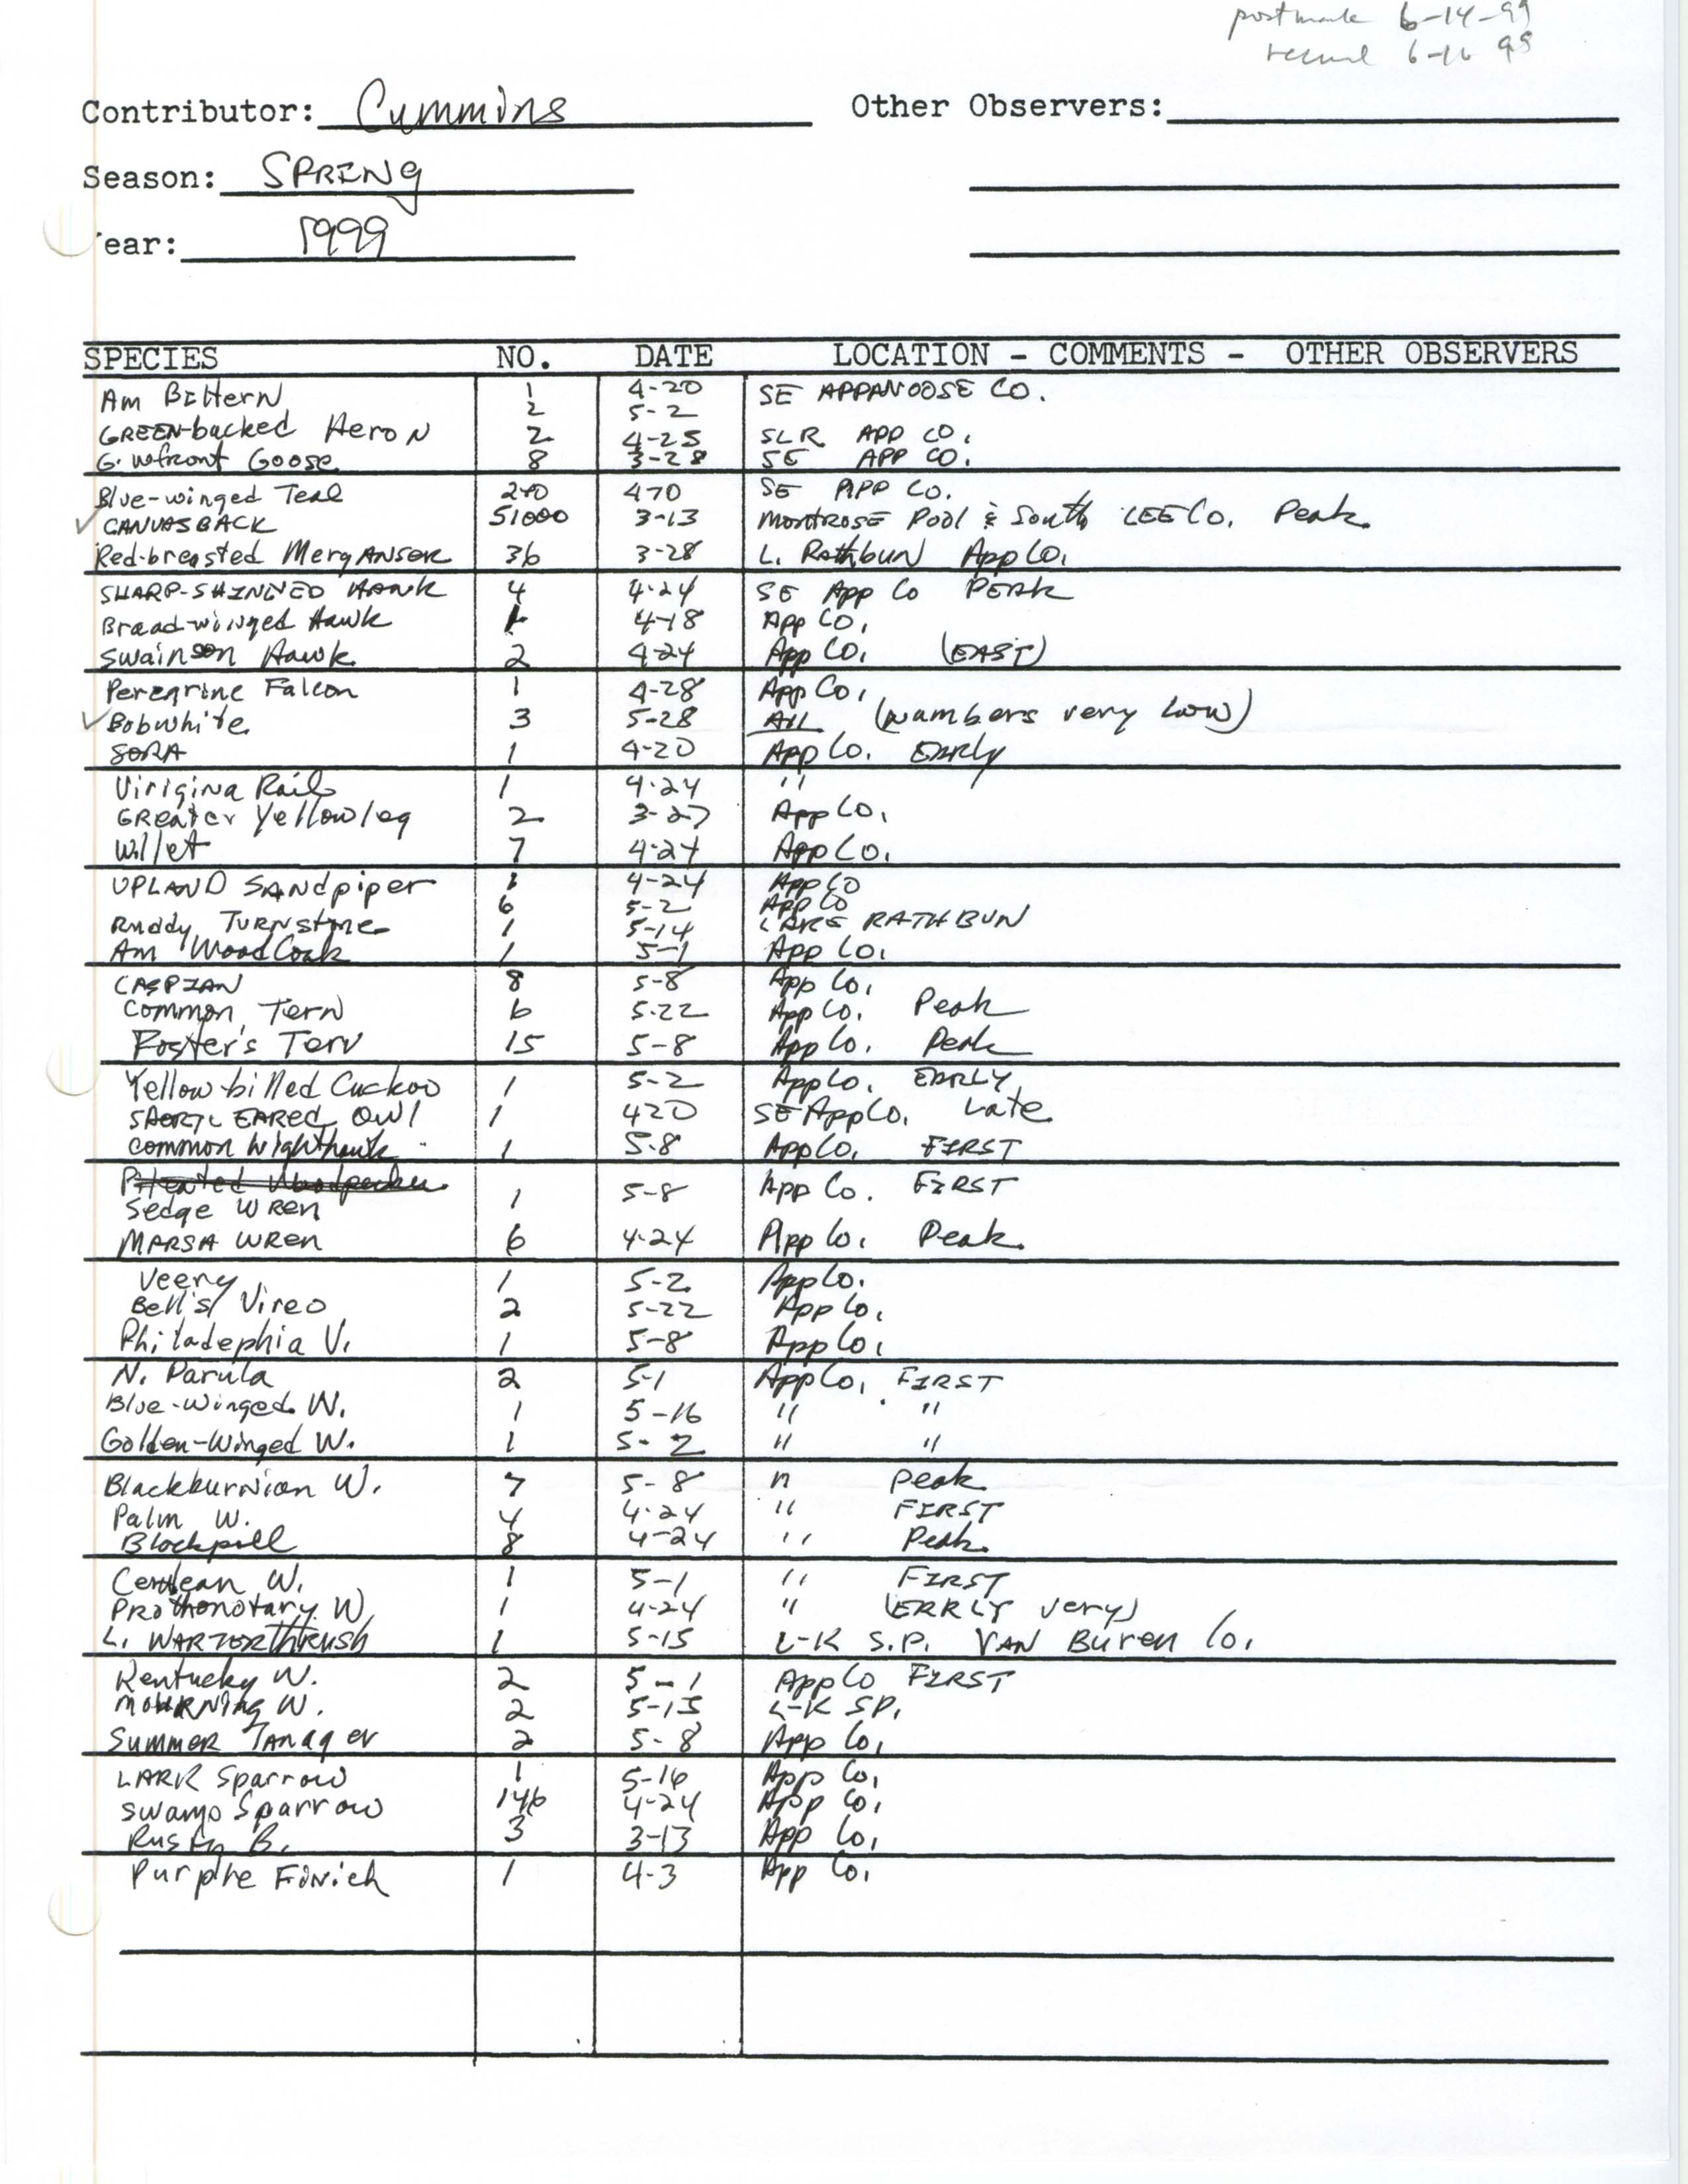 Annotated bird sighting list for spring 1999 compiled by Ray Cummins